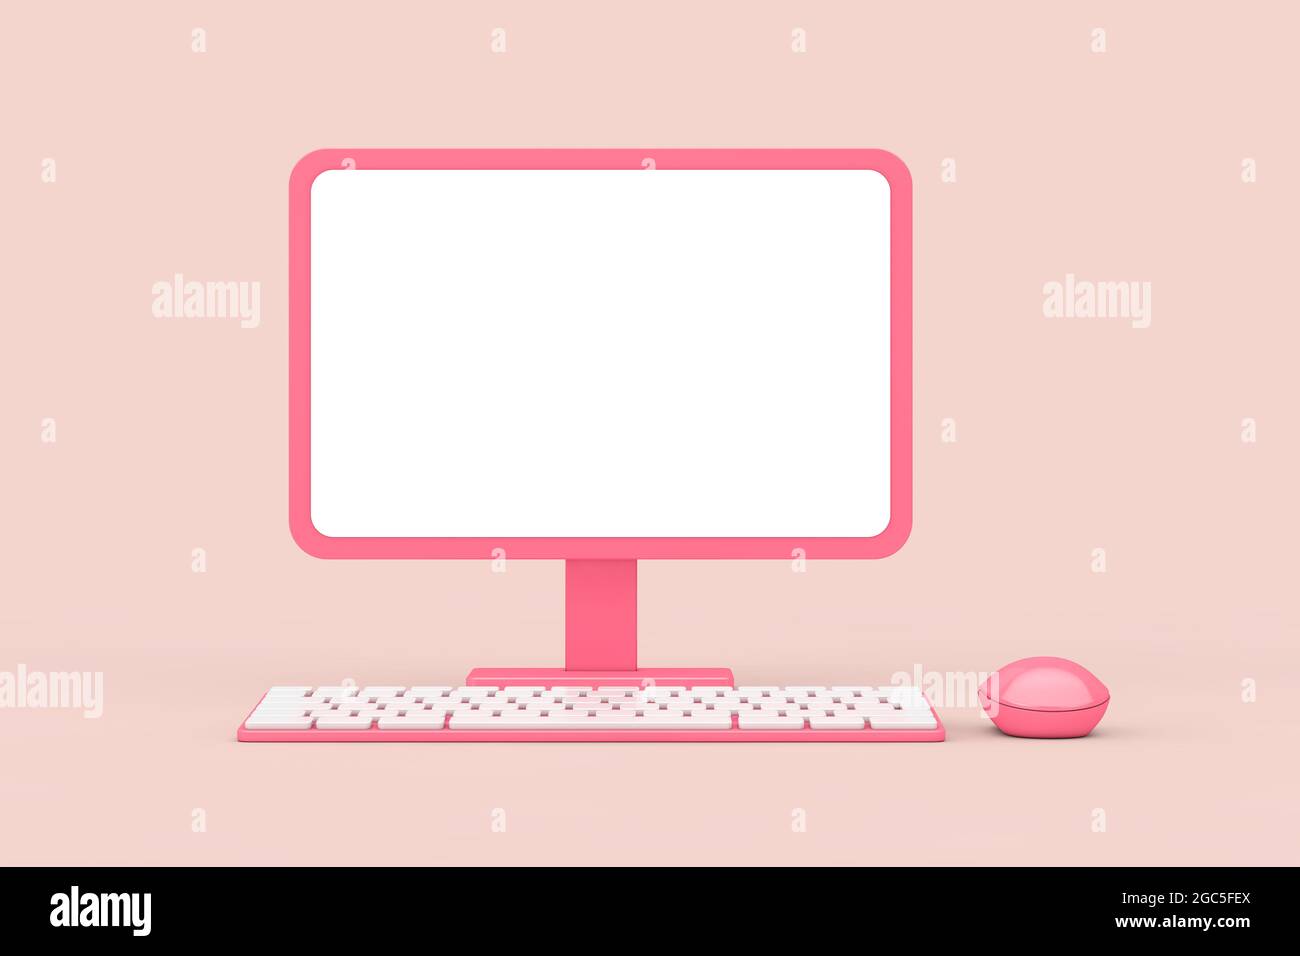 Abstract Cartoon Pink Desktop Computer with Mouse, Keyboard and Blank  Screen for Your Design in Duotone Style on a pink background. 3d Rendering  Stock Photo - Alamy